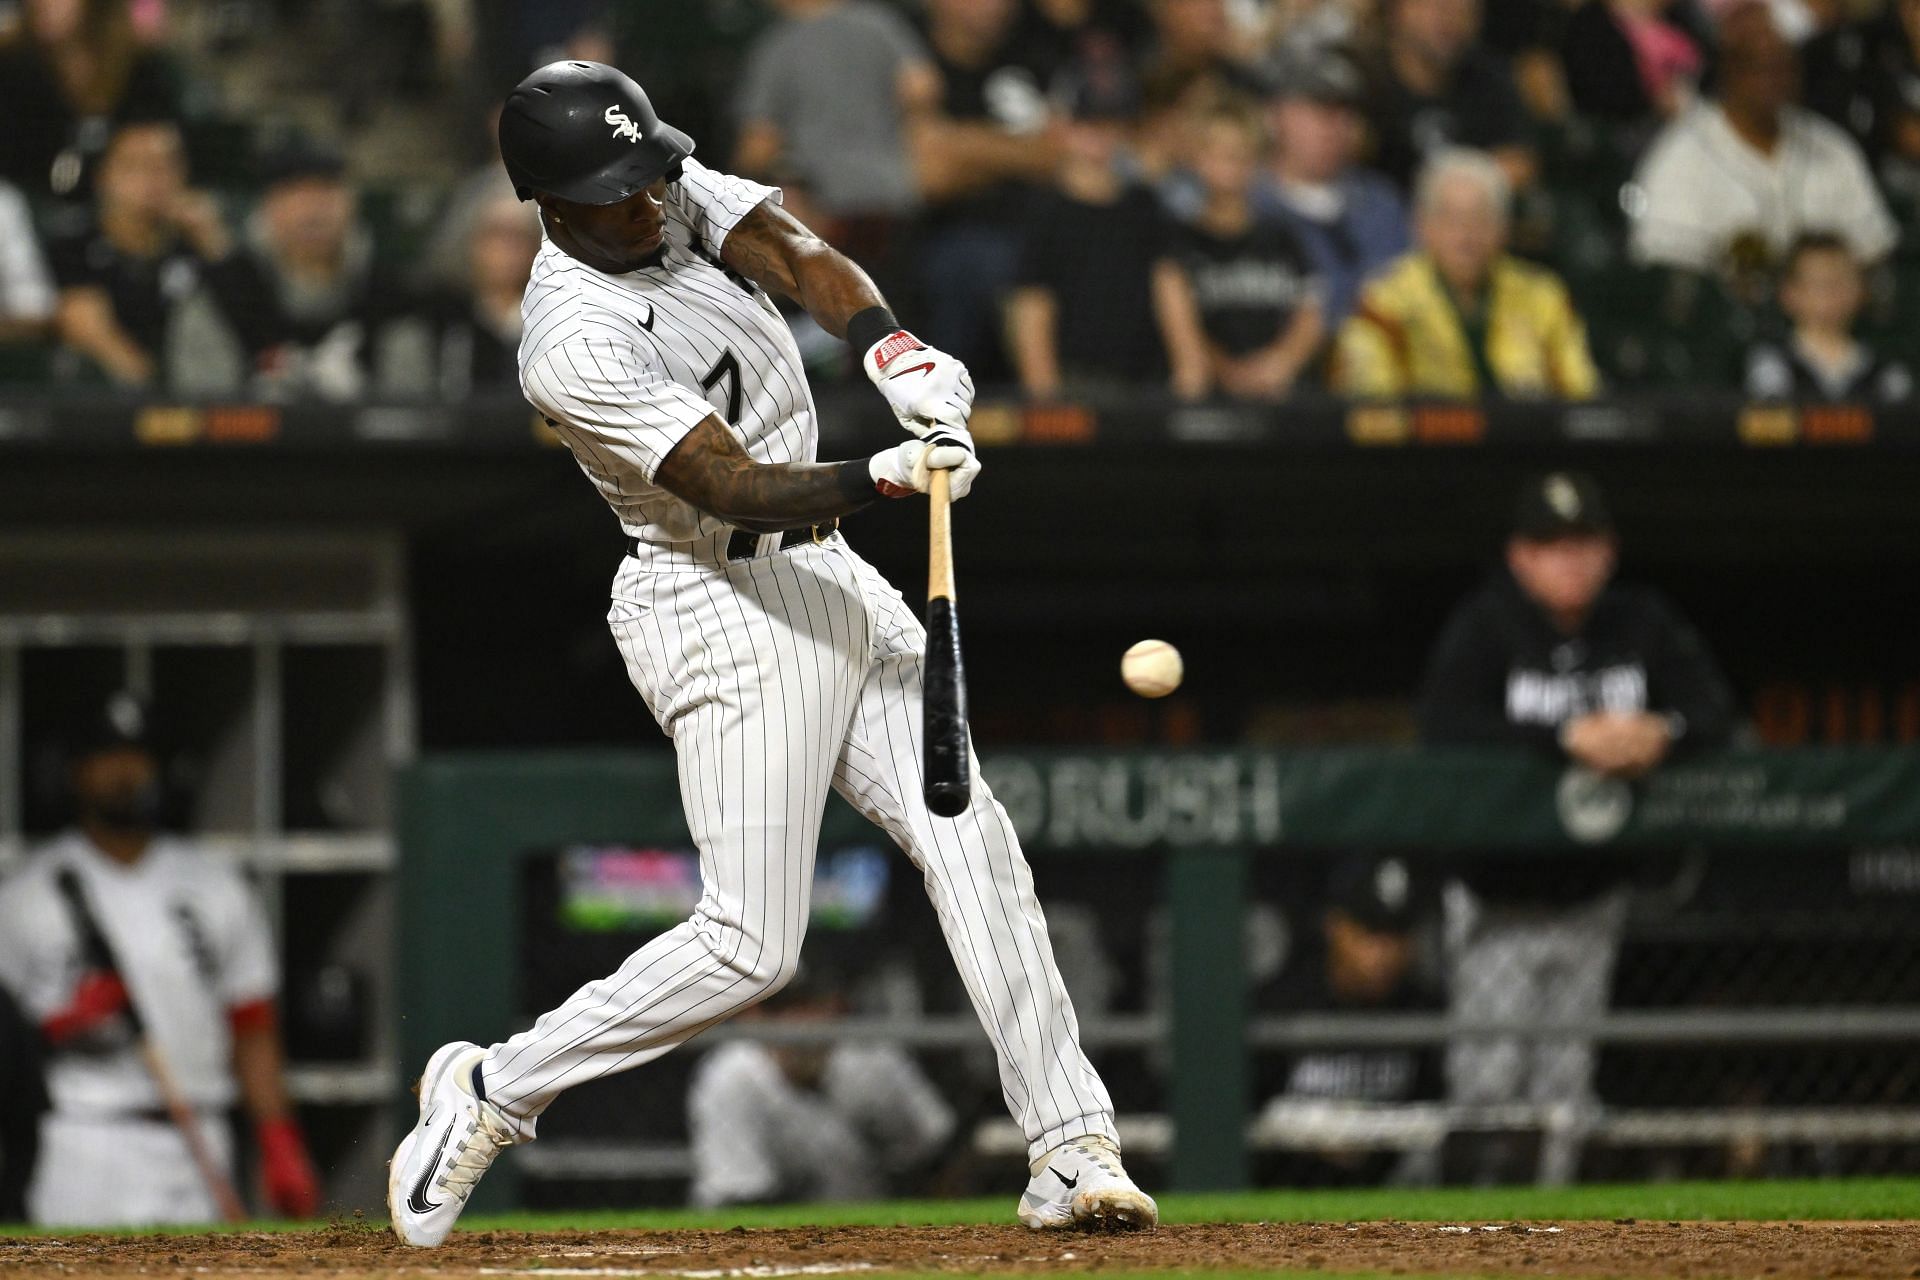 Tim Anderson has signed with the Marlins